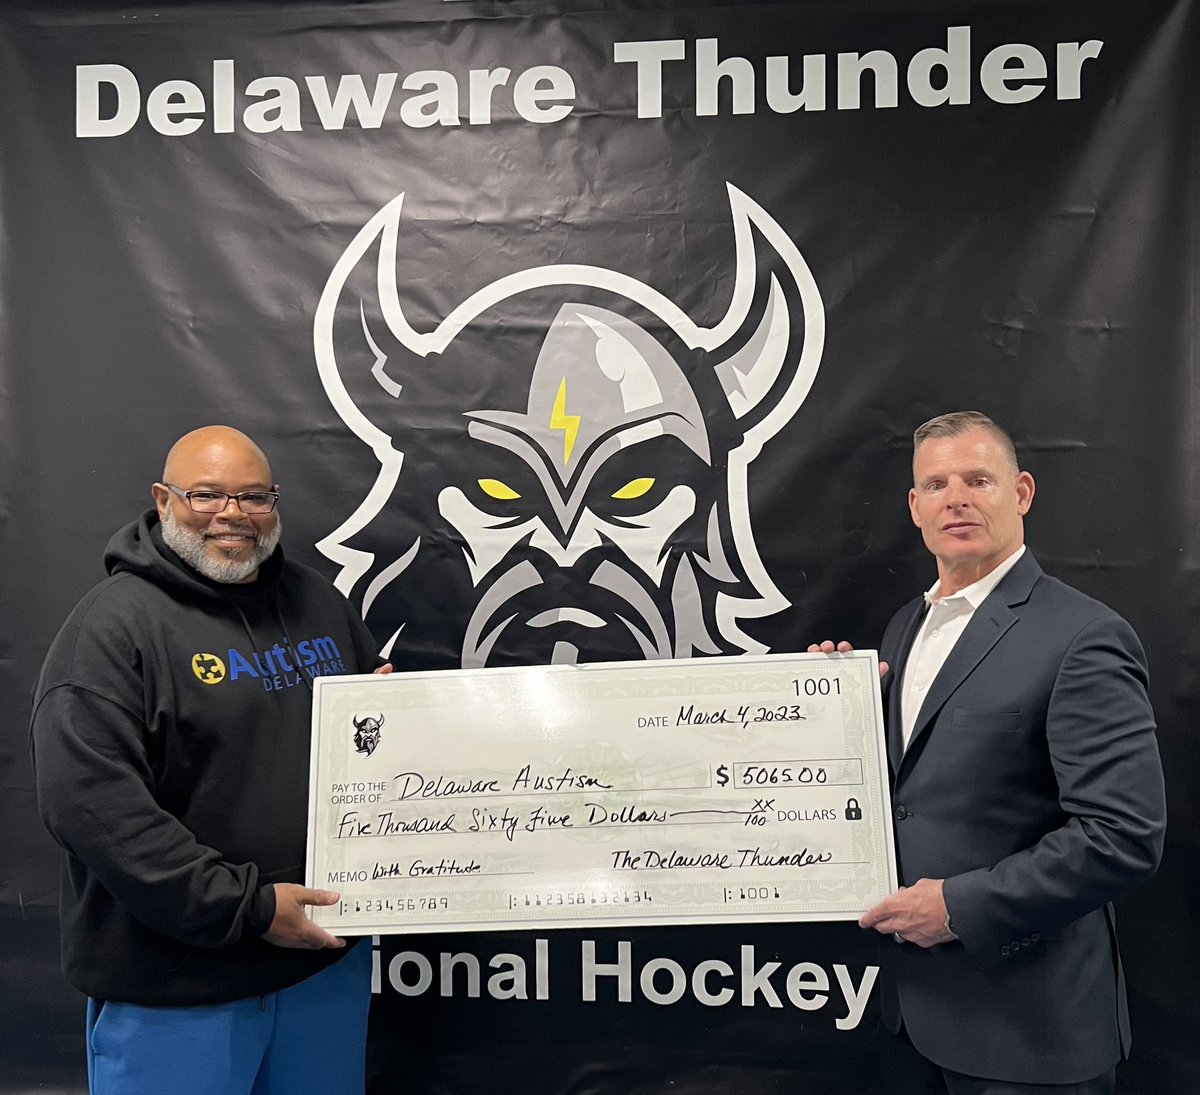 🏒🏒 Thank you Delaware Thunder and Delaware's hockey fans 🏒🏒 for coming out to Autism Awareness Night at the Thunderdome on Saturday and for bidding on the team's special game-worn jerseys. ❤🧡💛💚💙💜